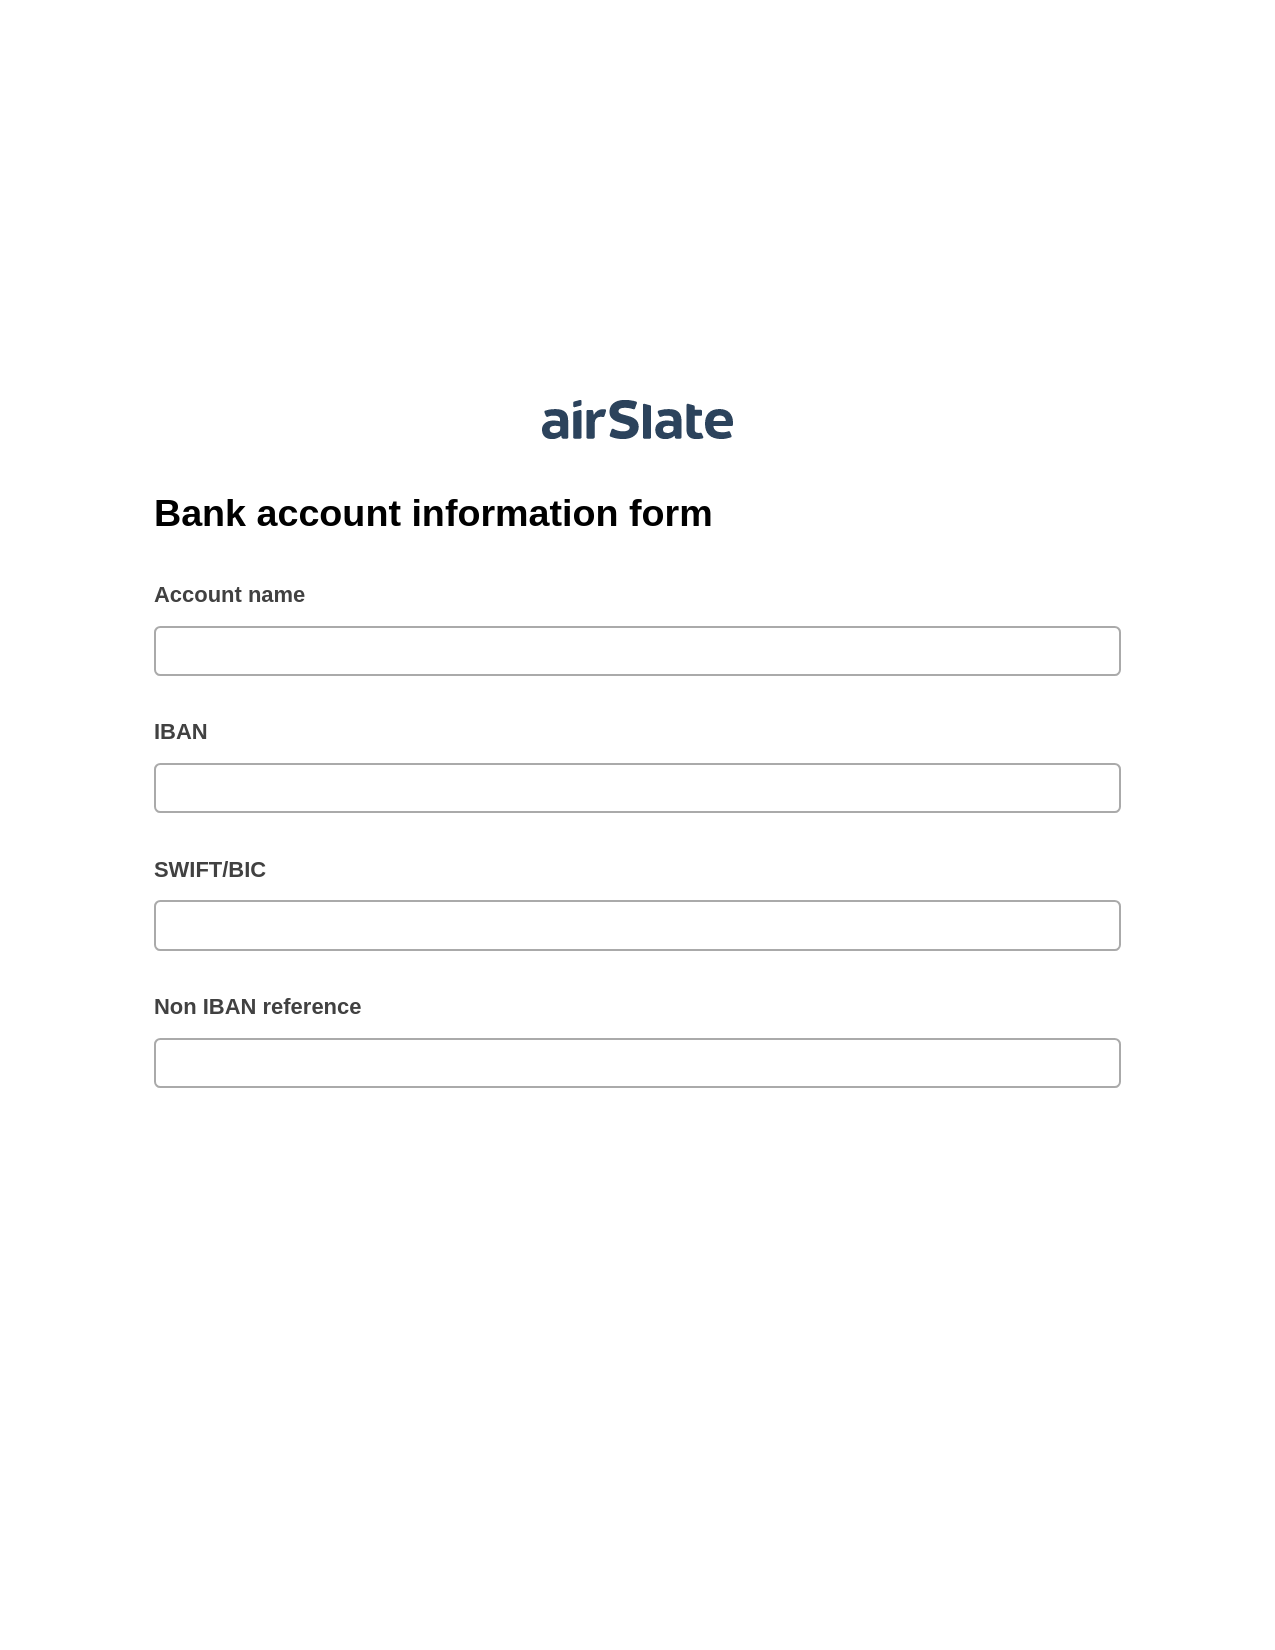 Multirole Bank account information form Pre-fill from CSV File Bot, Create NetSuite Records Bot, Archive to SharePoint Folder Bot